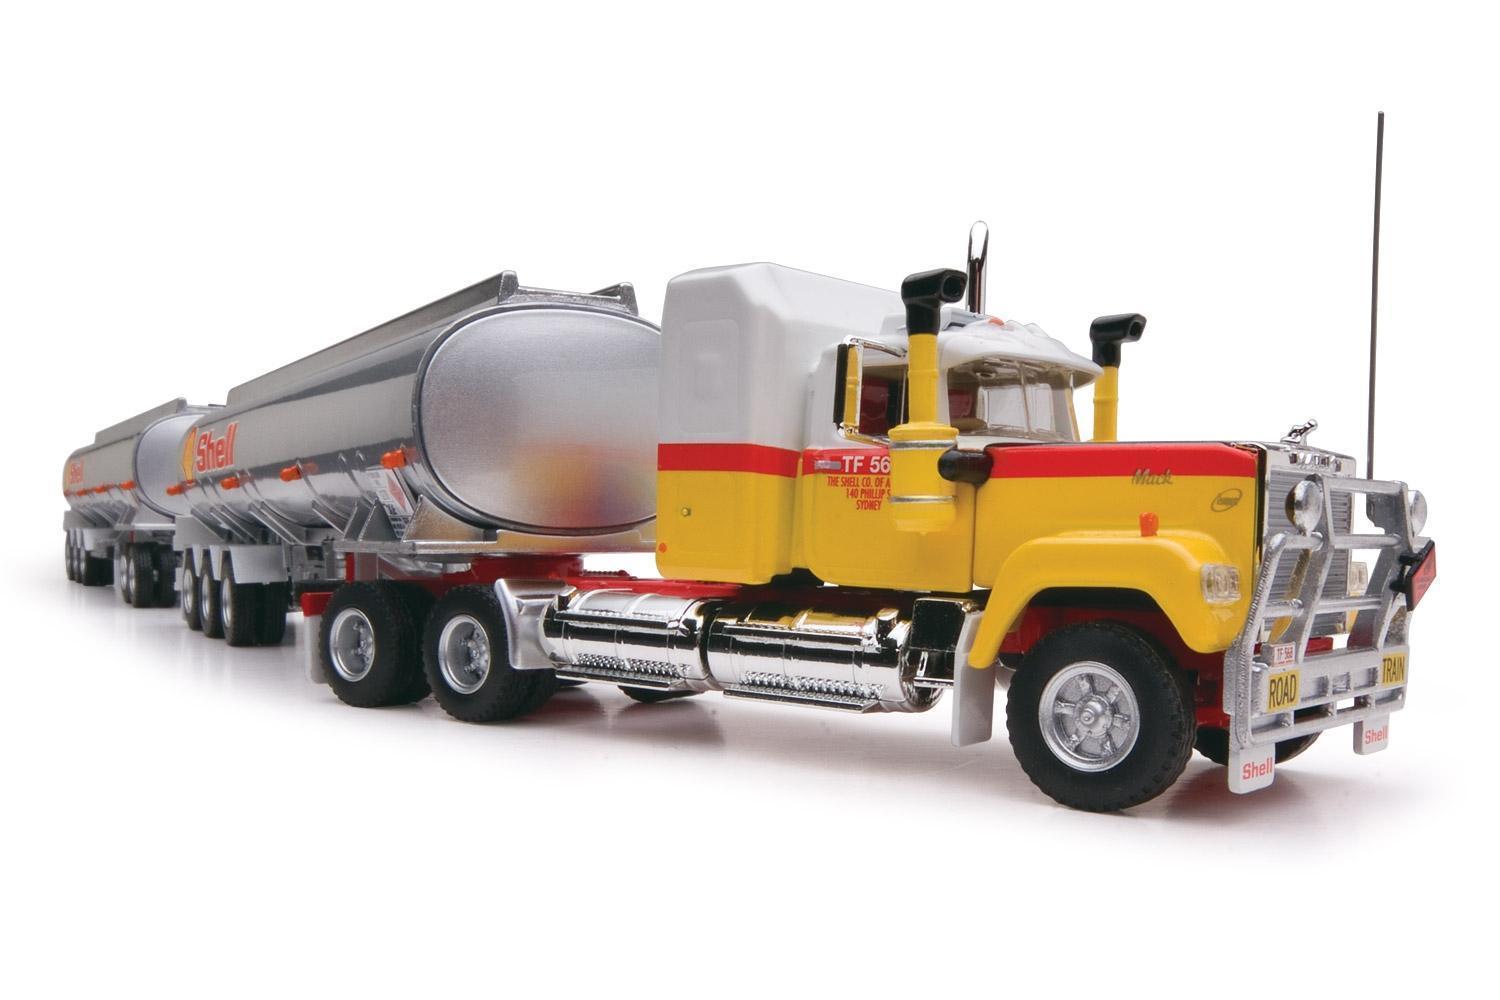 **PRE-ORDER** SHELL Highway Replicas Tanker Road Train Die Cast Model Truck With Additional Trailer & Dolly 1:64 **FULL PRICE $248.00**